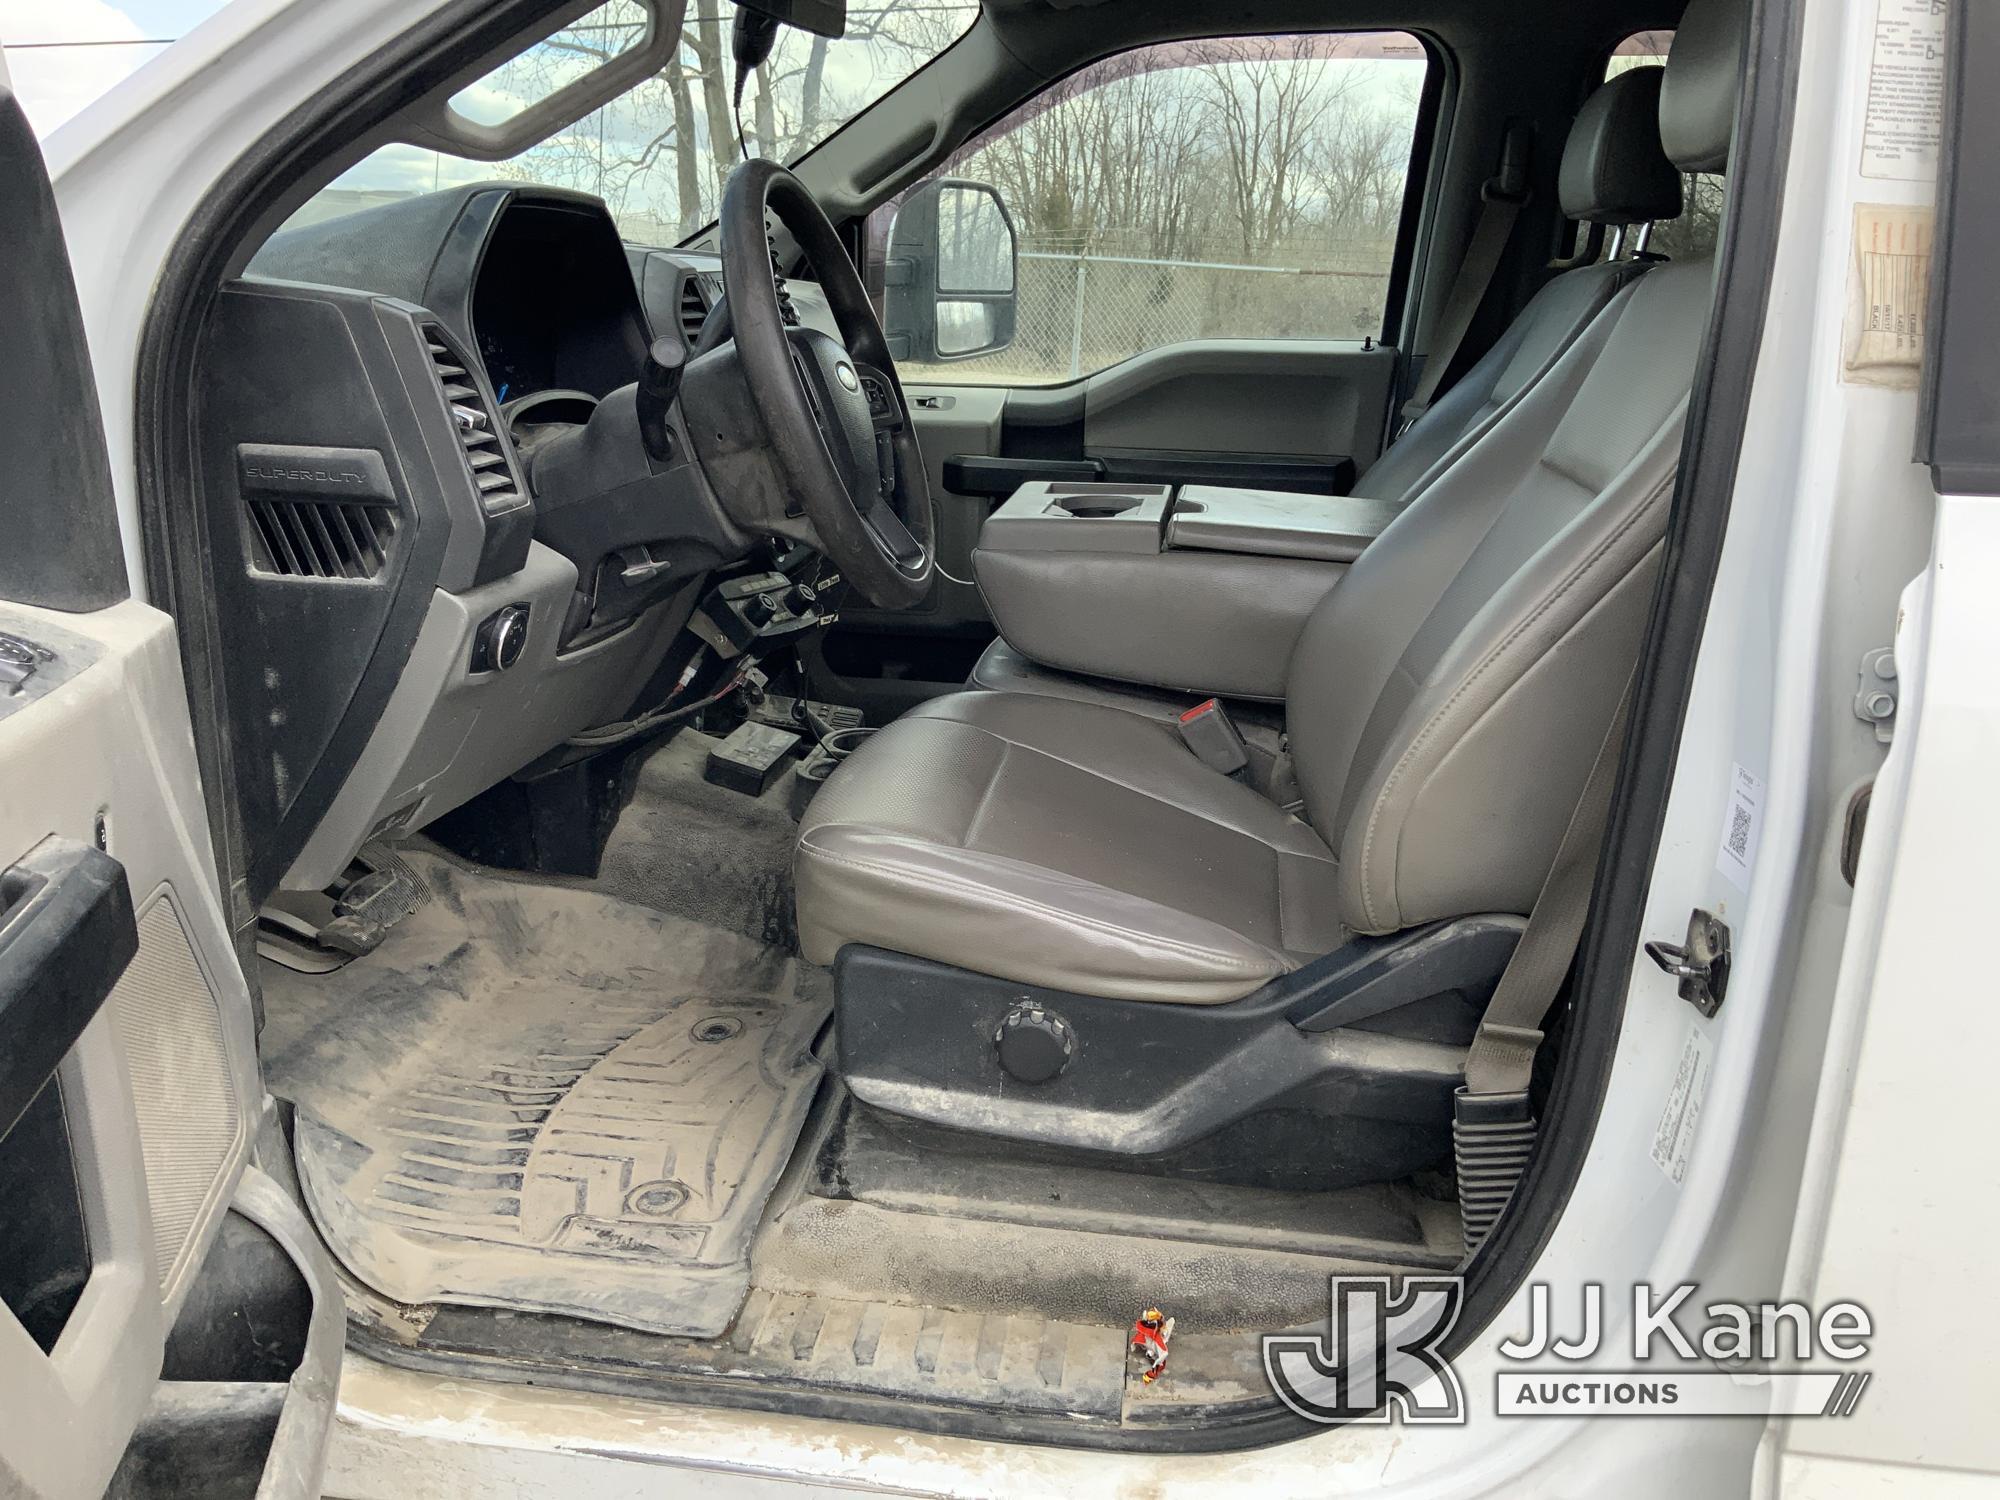 (Fort Wayne, IN) 2017 Ford F550 4x4 Crew-Cab Flatbed Truck Runs & Moves